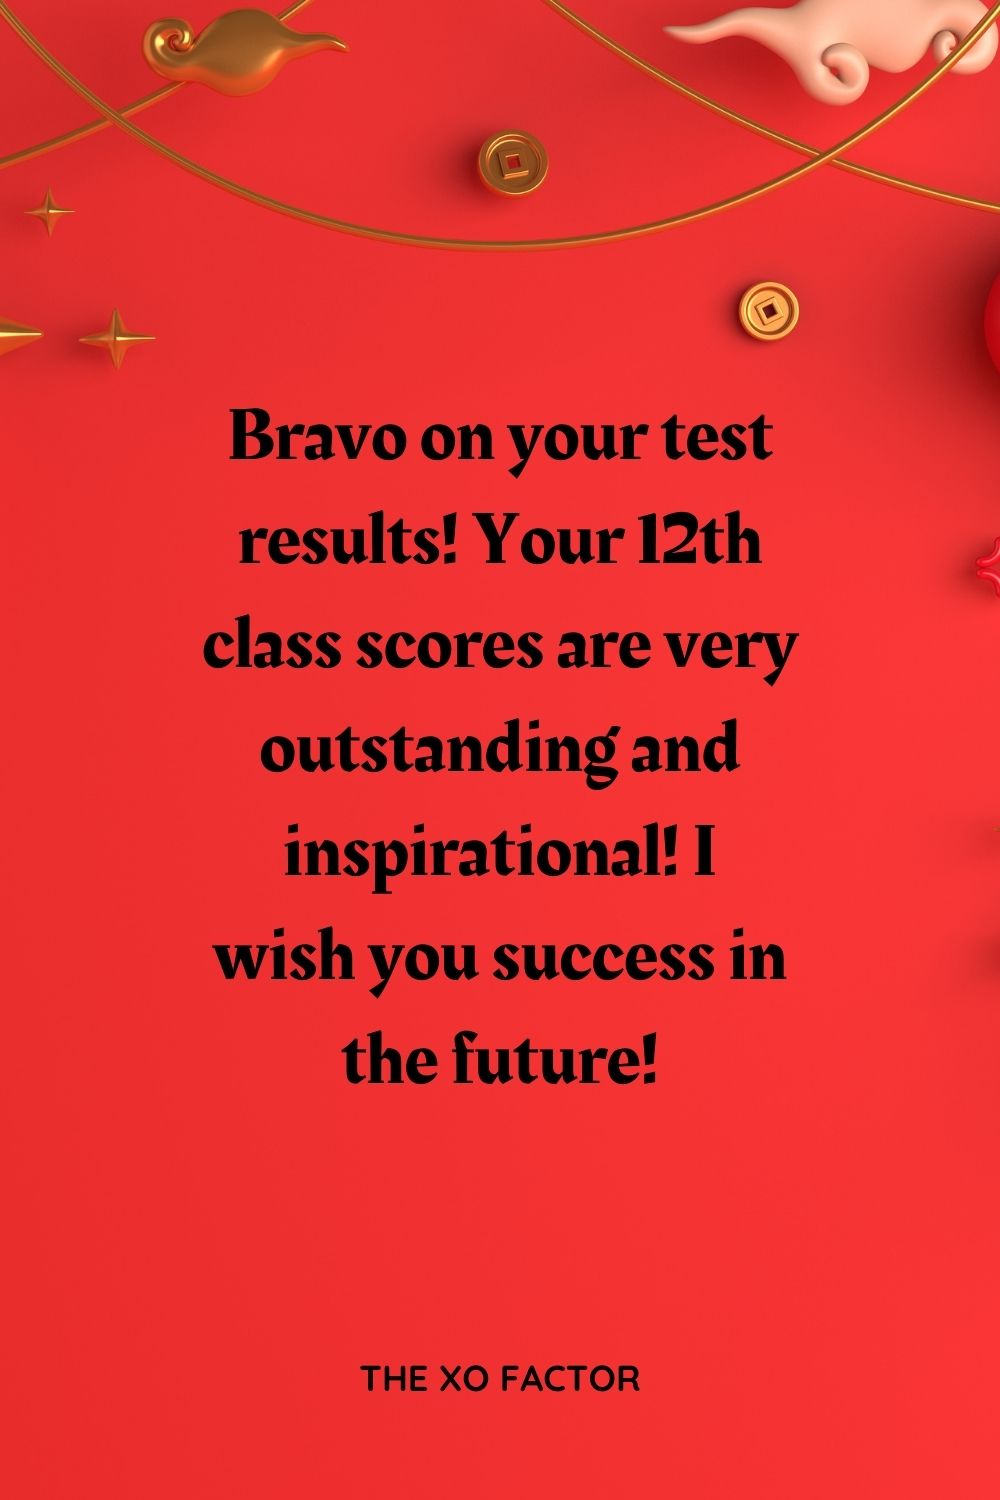 Bravo on your test results! Your 12th class scores are very outstanding and inspirational! I wish you success in the future!